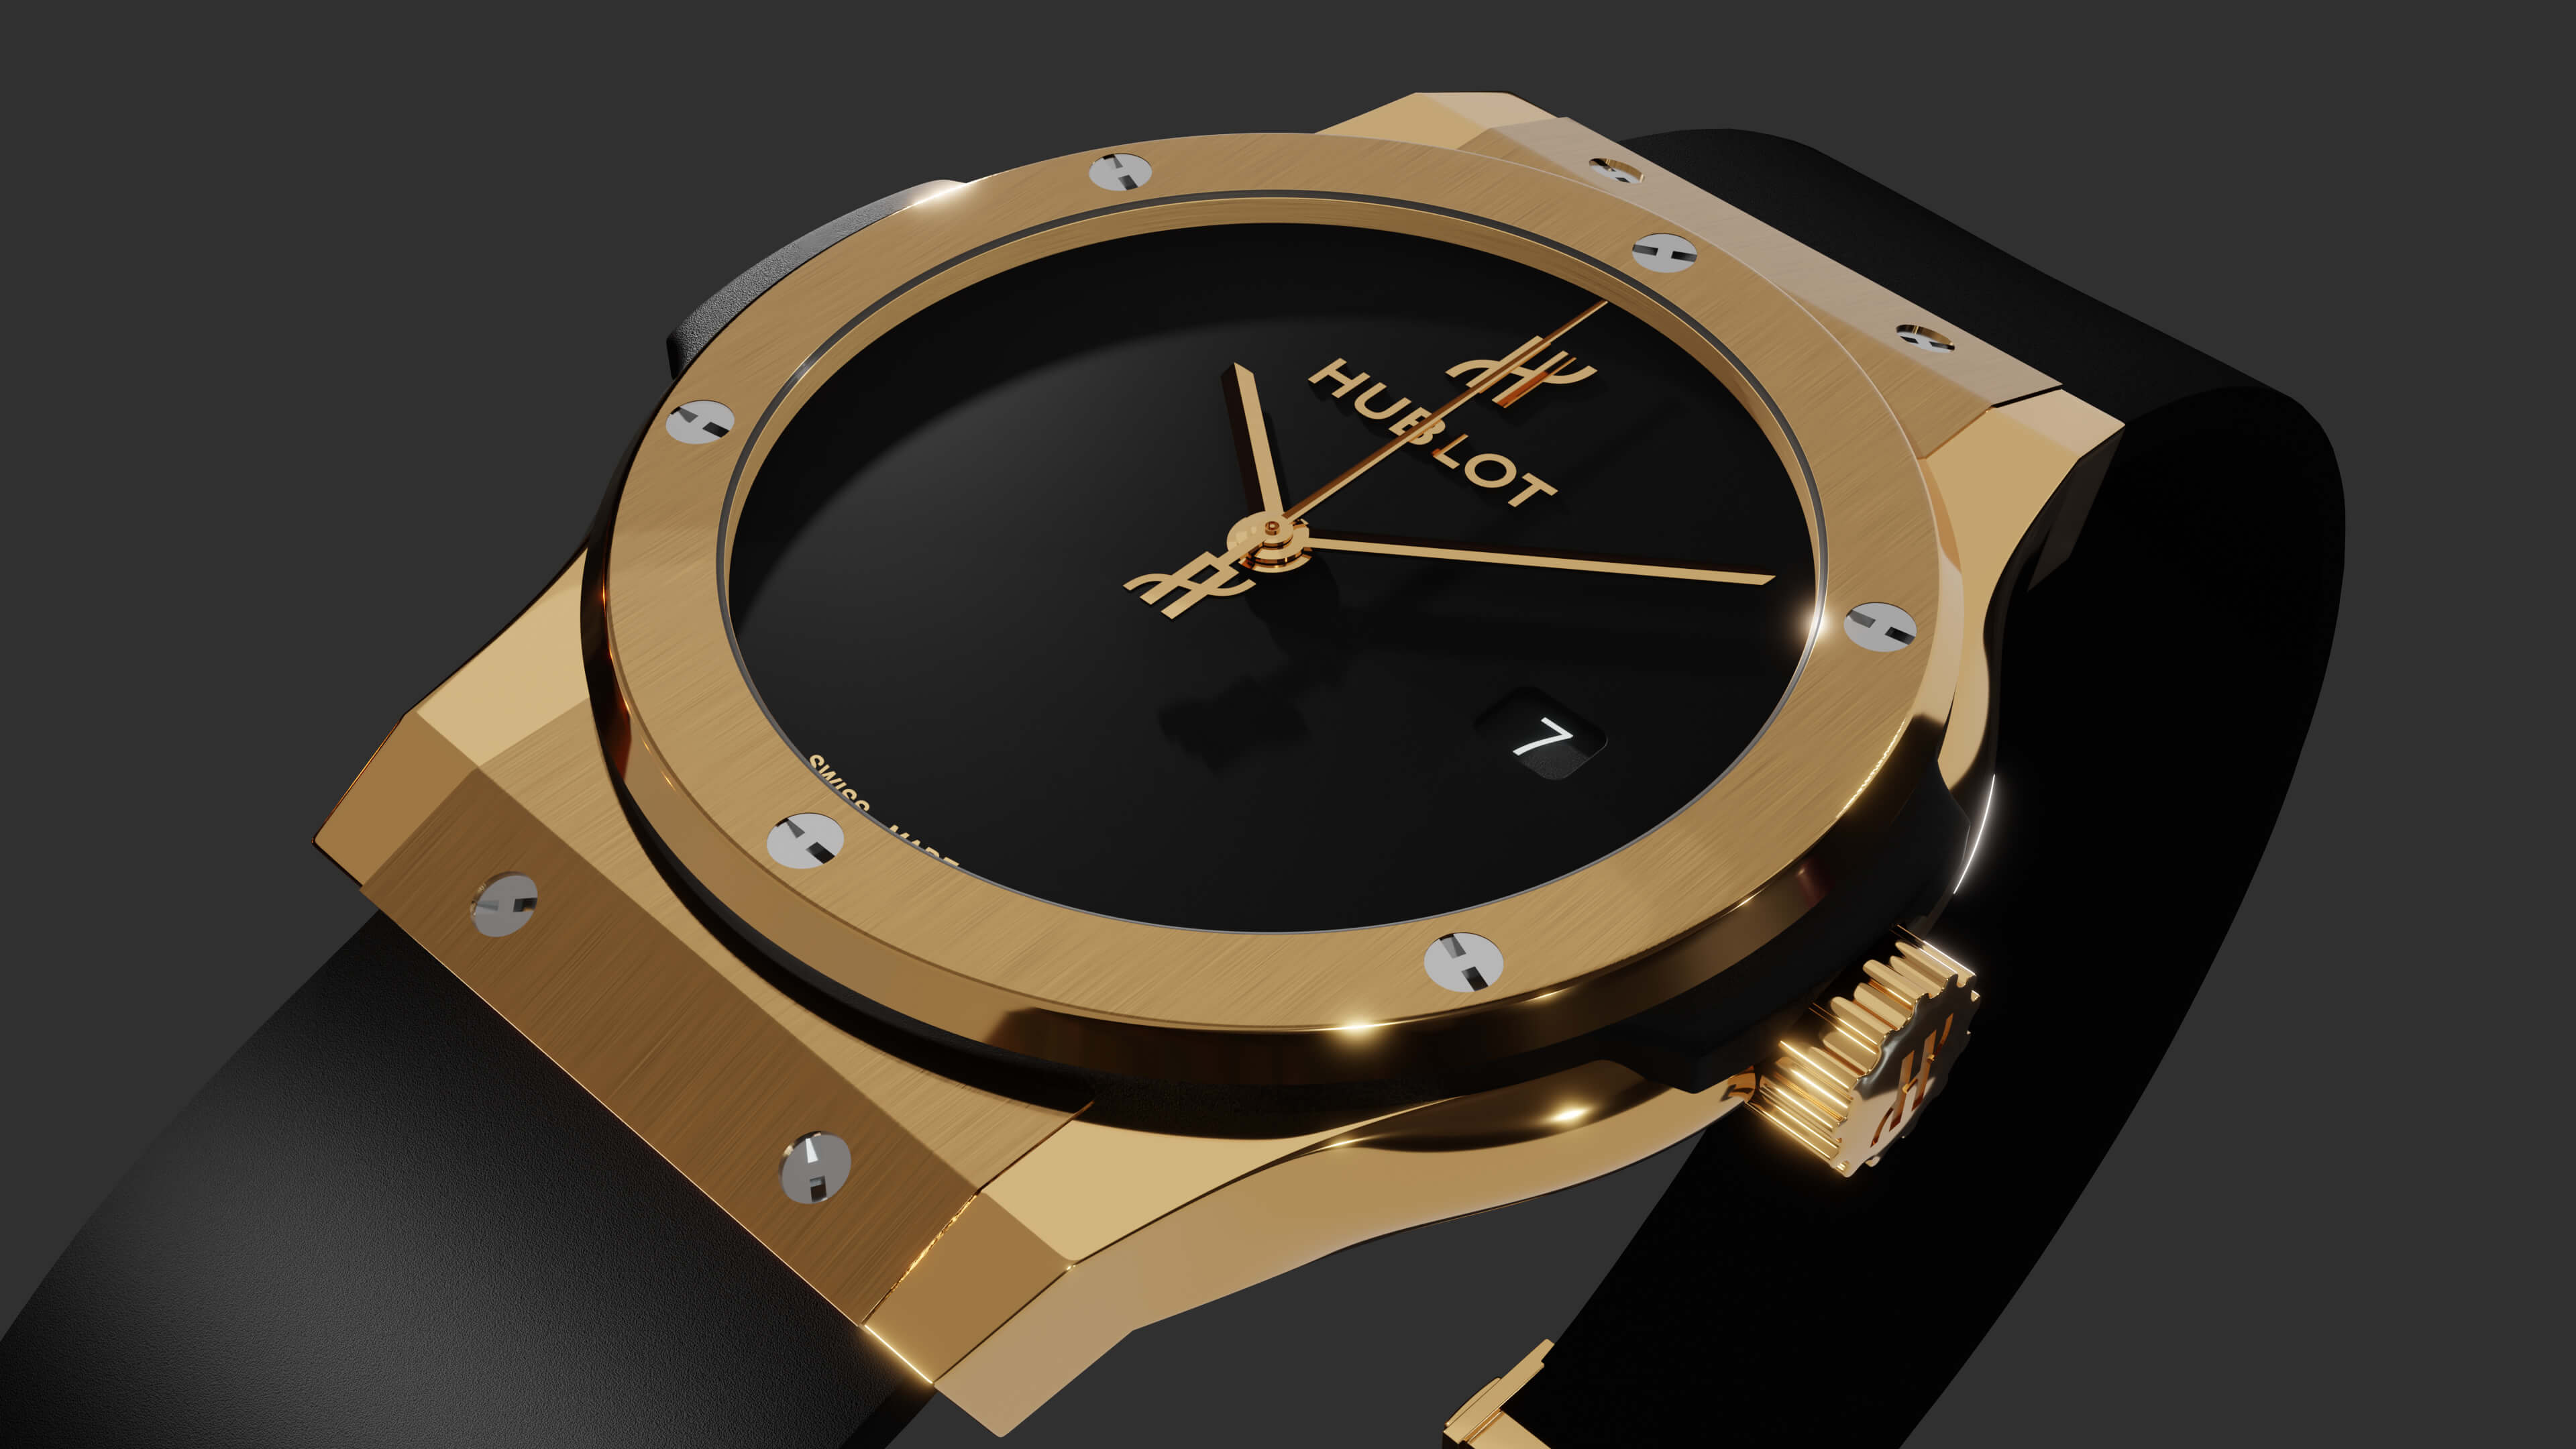 hublot watch modeling, texturing shading and rendering.